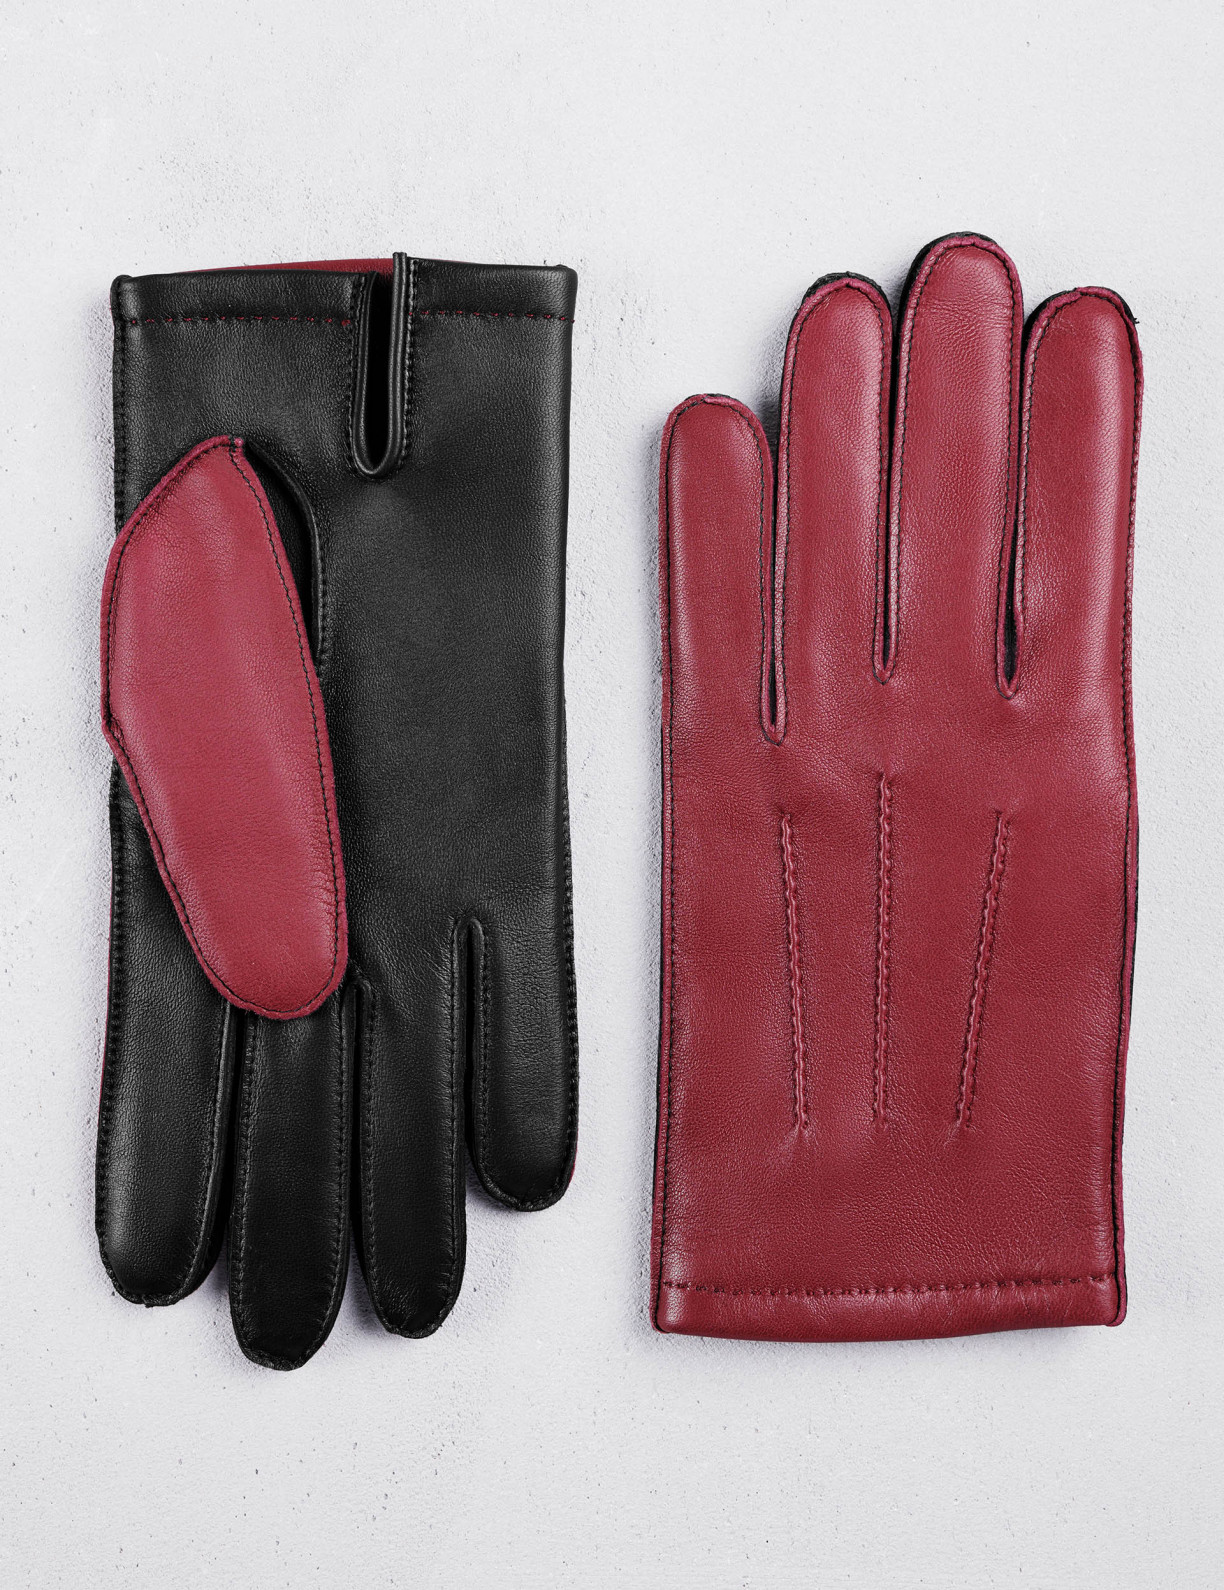 Men's touchscreen gloves with stitching|Camille Fournet